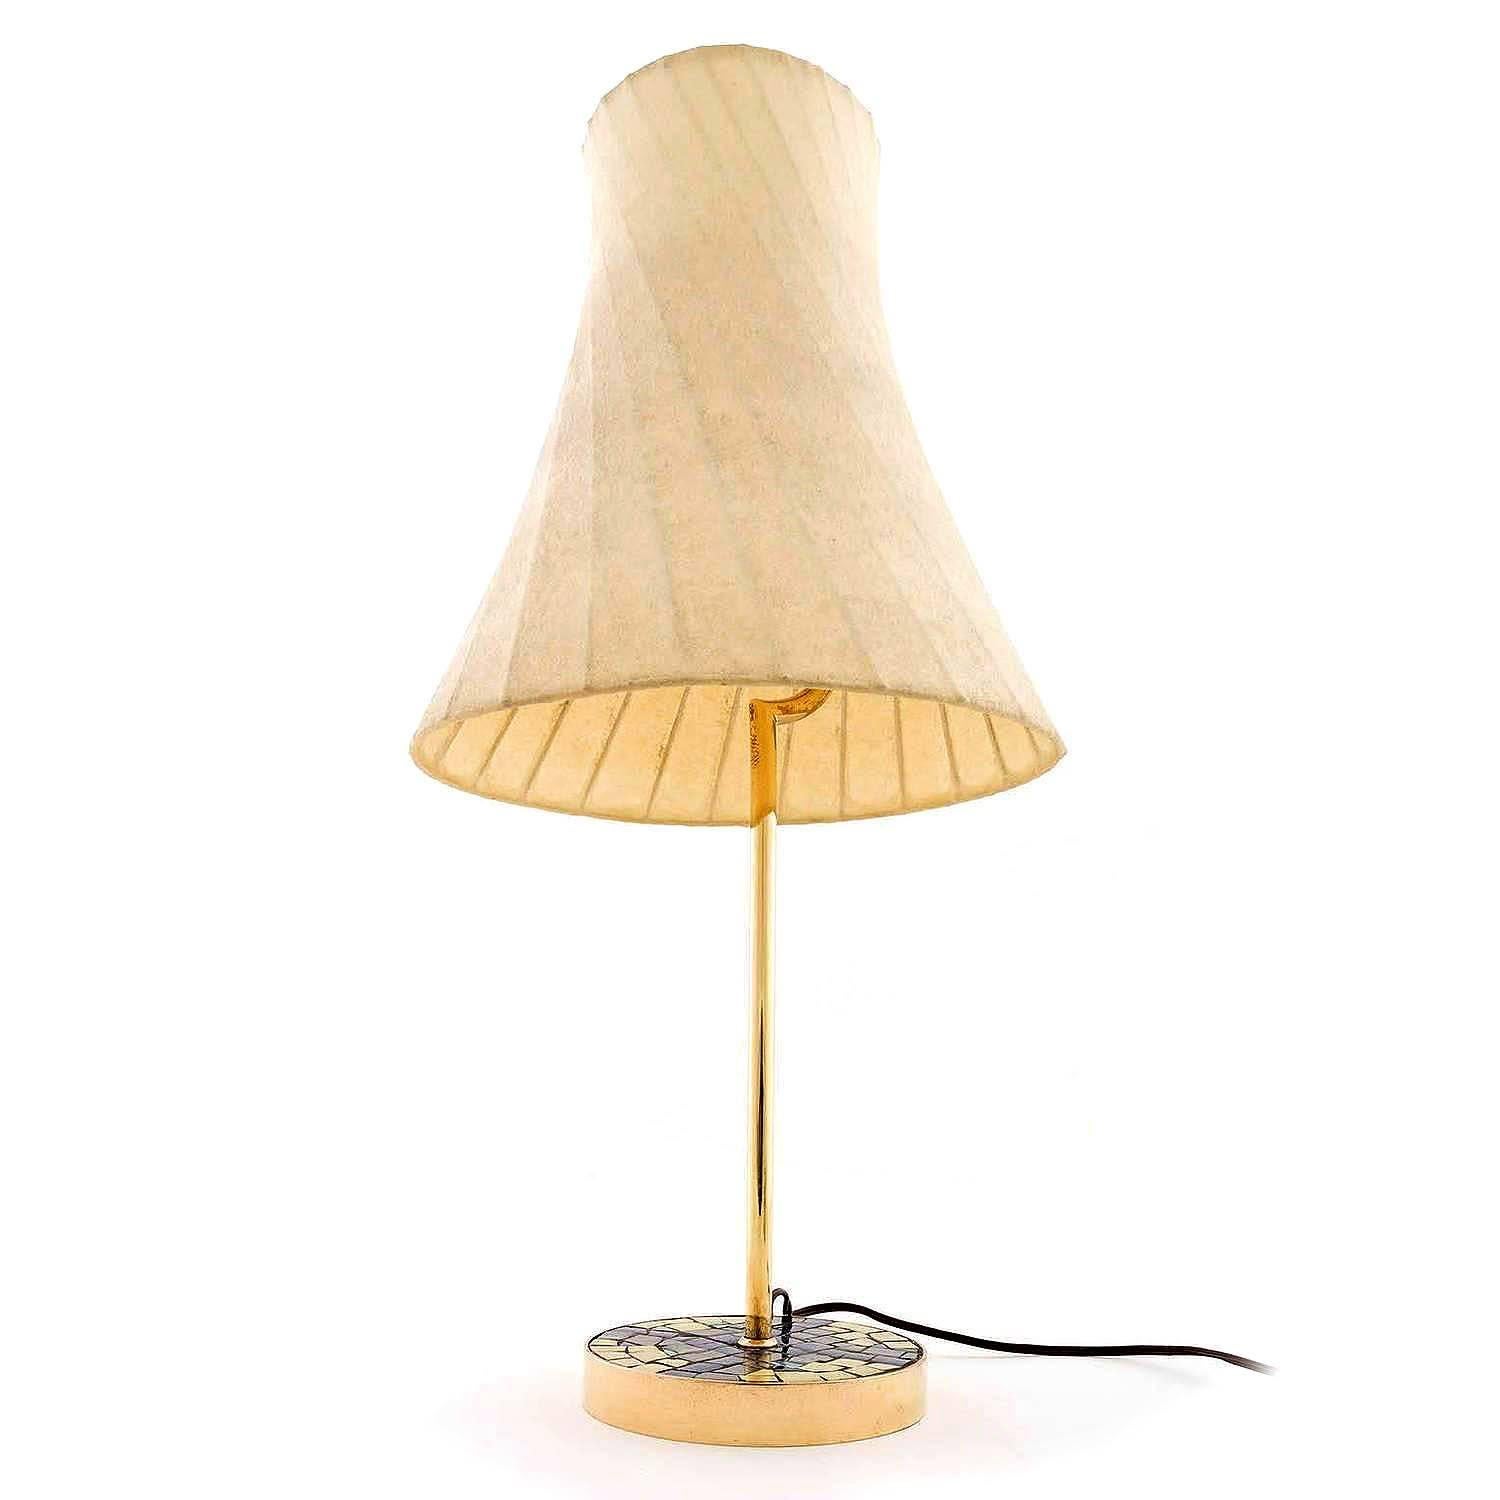 A rare Mid-Century Modern table lamp model 'Spule' no. 1235. by J.T. Kalmar, Austria, manufactured ca. 1960 (1950s - 1960s). A brass Stand with mosaic inlay. The polymer latex cocoon diffuser has an internal metal strucutre. Very good condition with